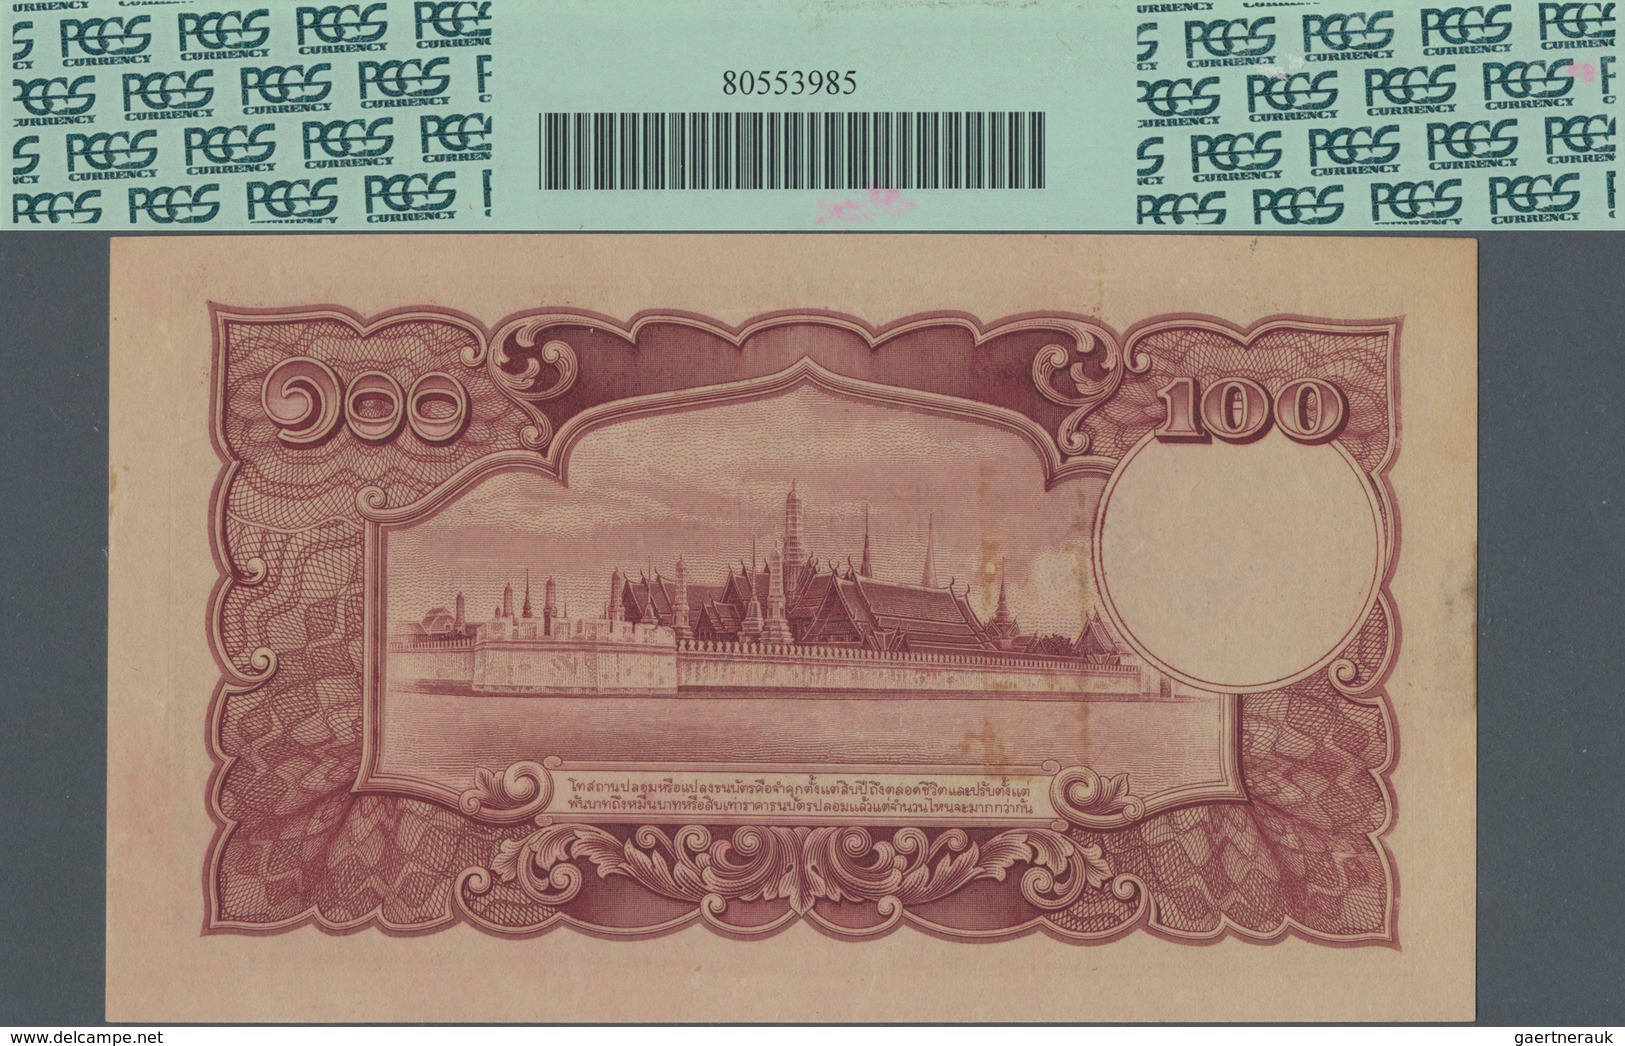 Thailand: Government Of Thailand 100 Baht ND(1943) SPECIMEN, P.51s1with Serial Number S/29 00000 And - Thailand